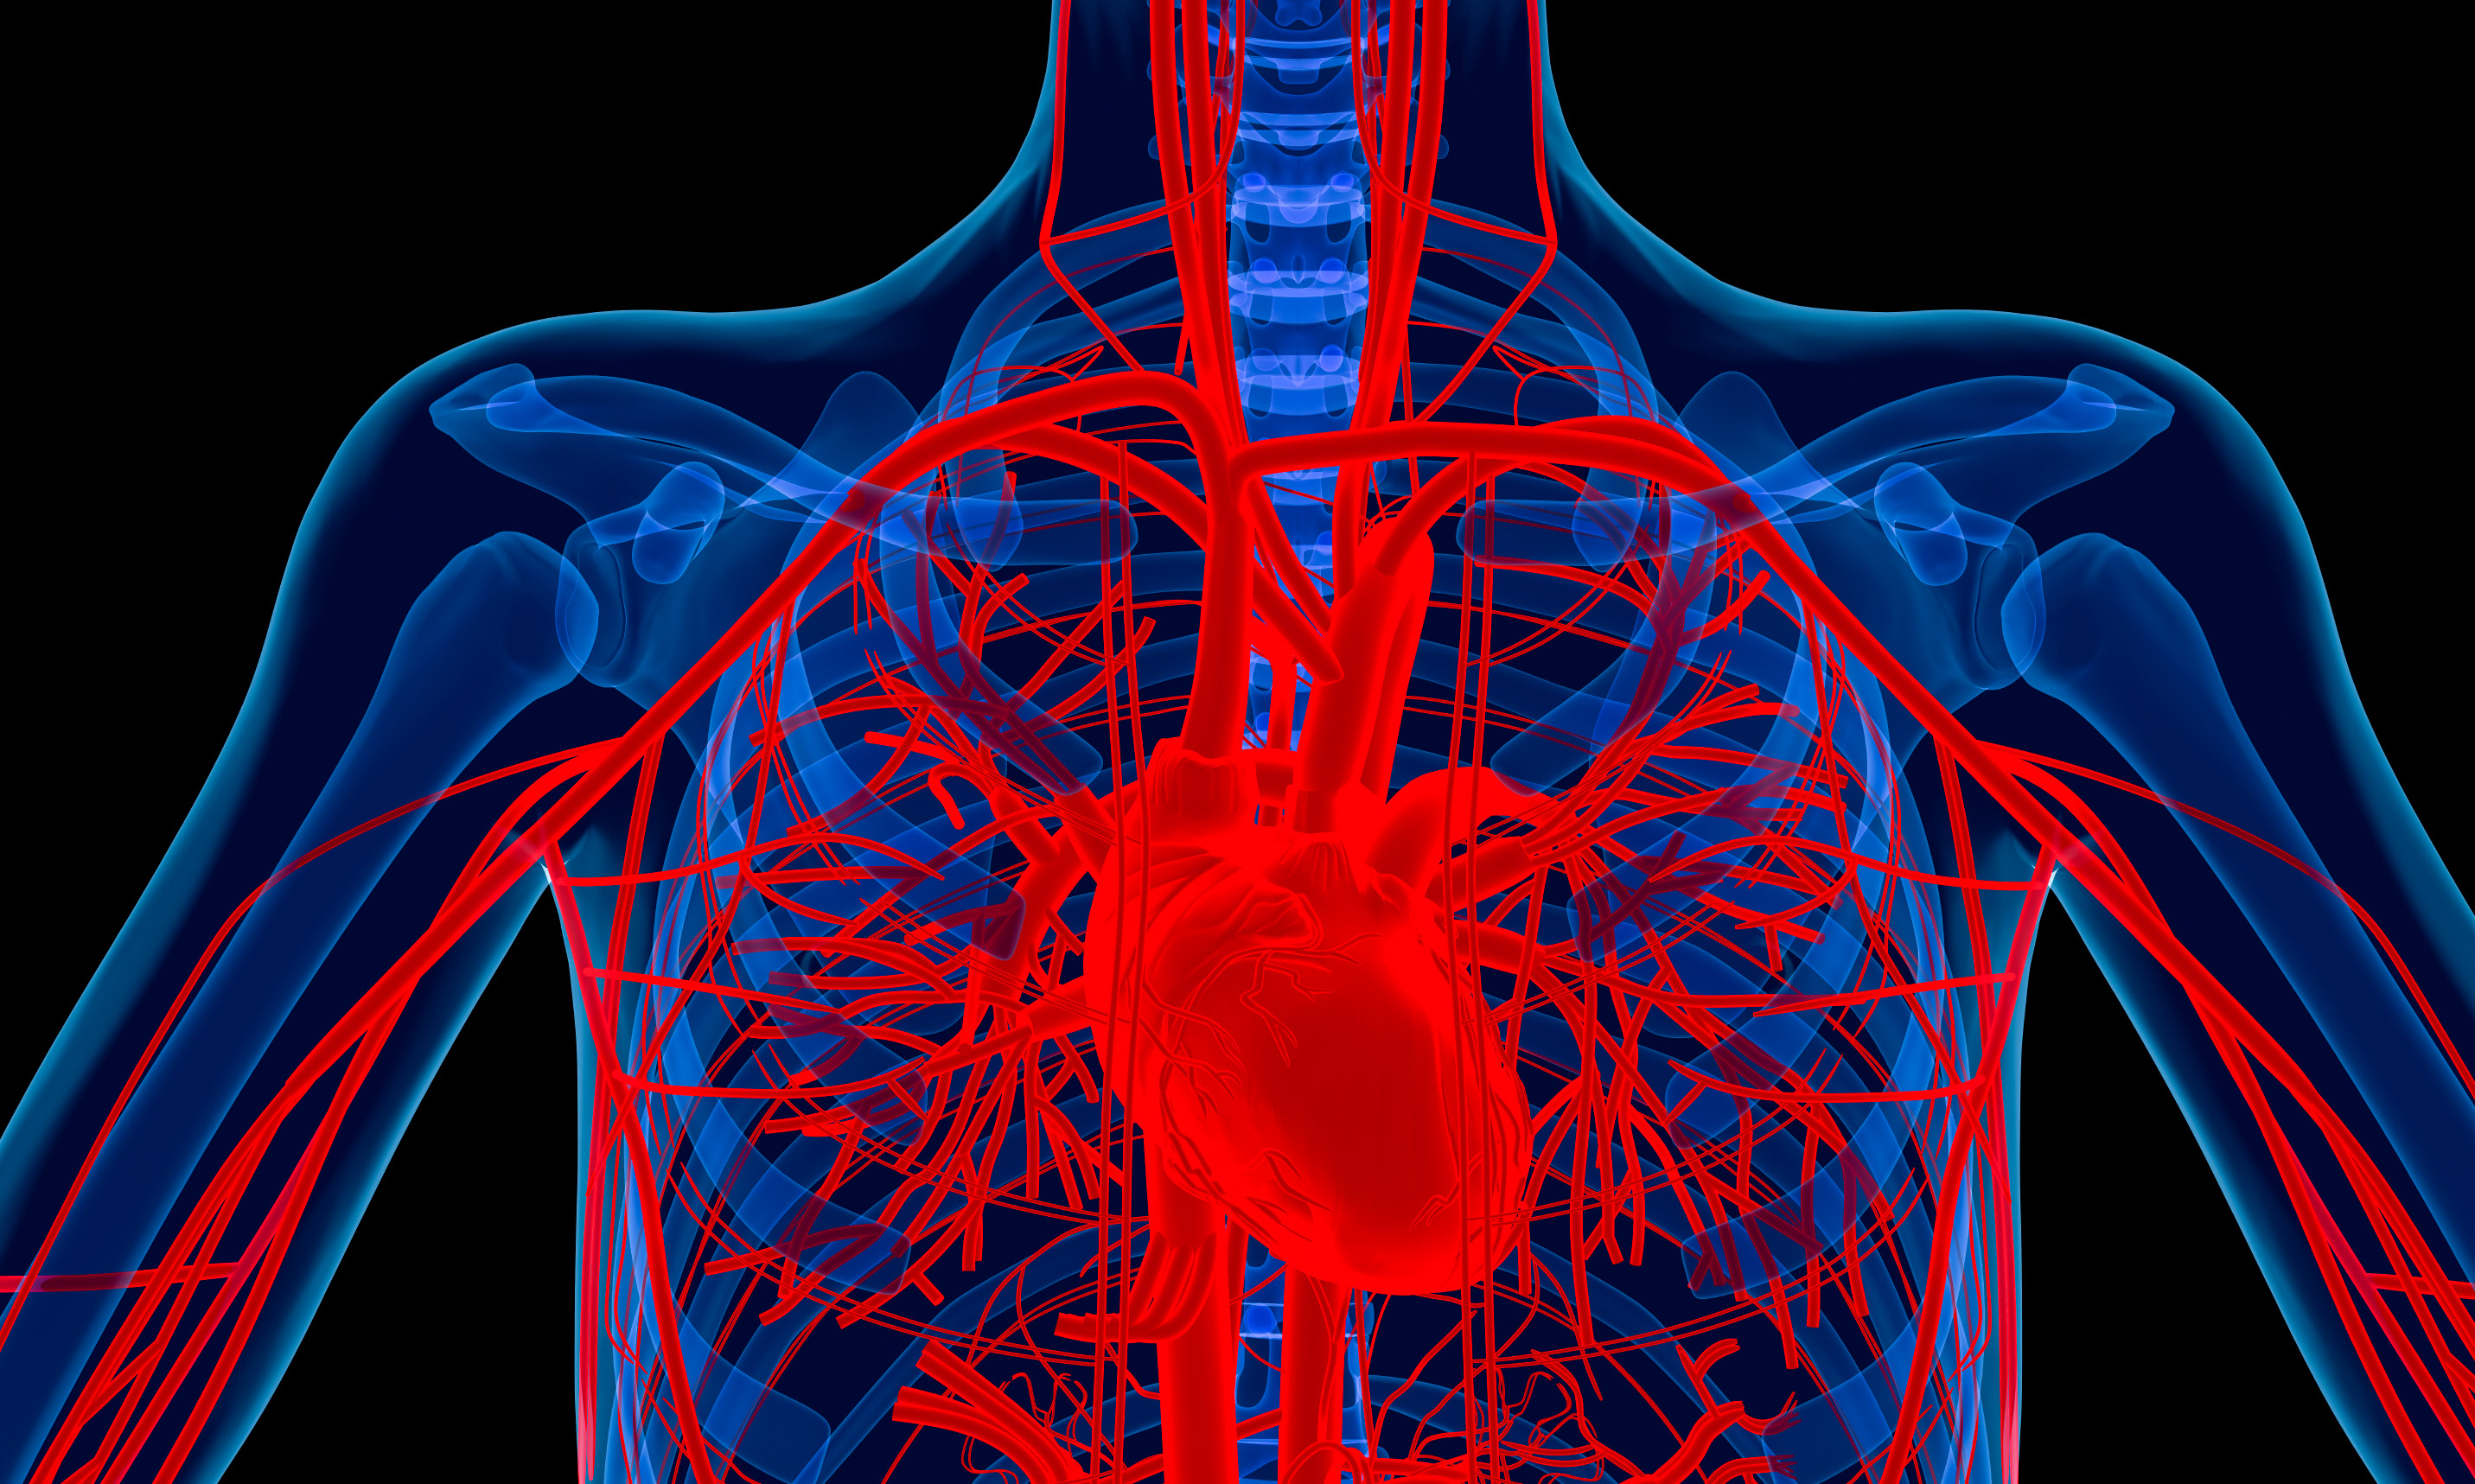 Illustration of the heart and blood vessels